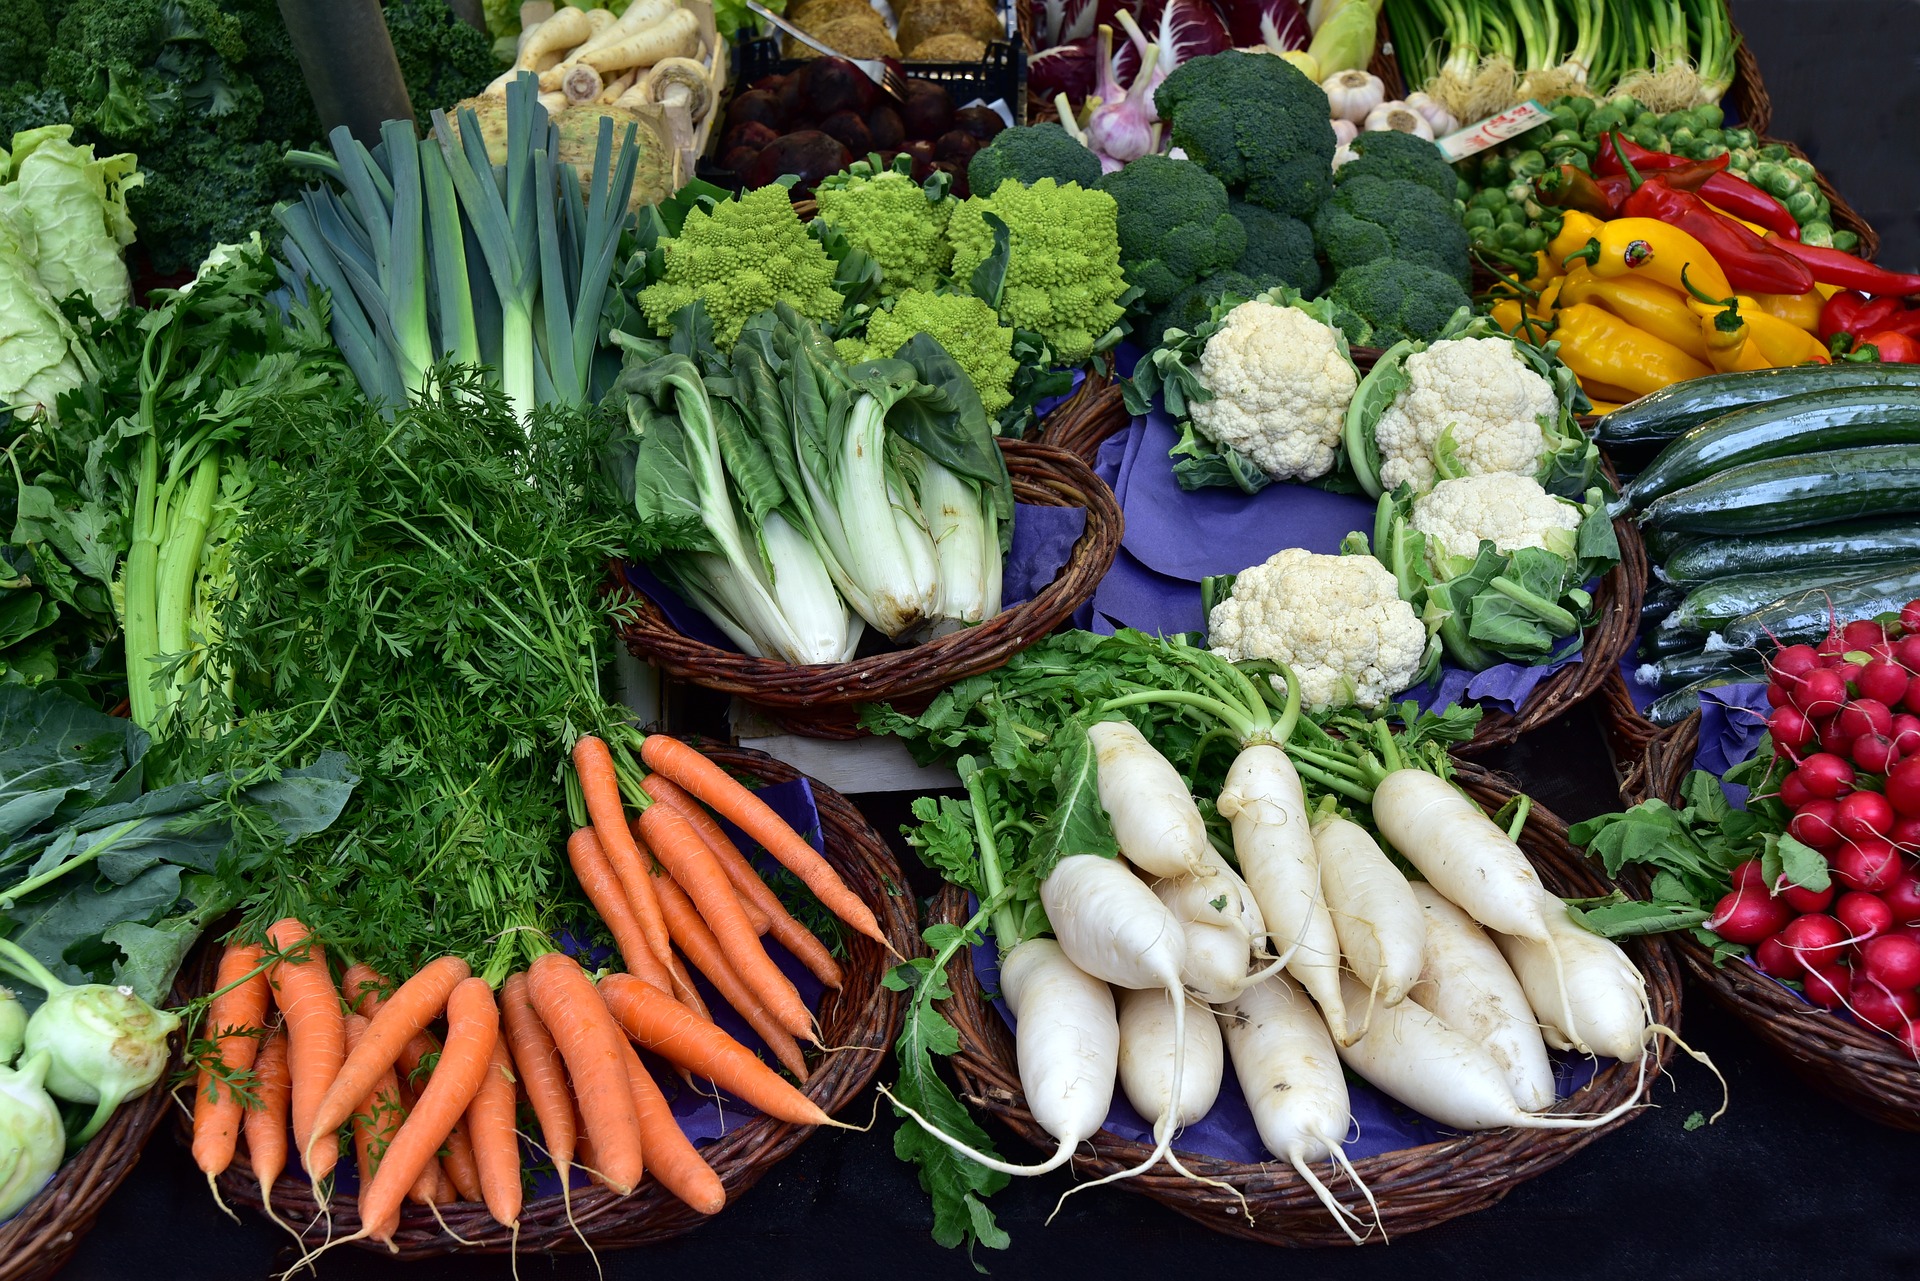 Selection of fresh vegetables